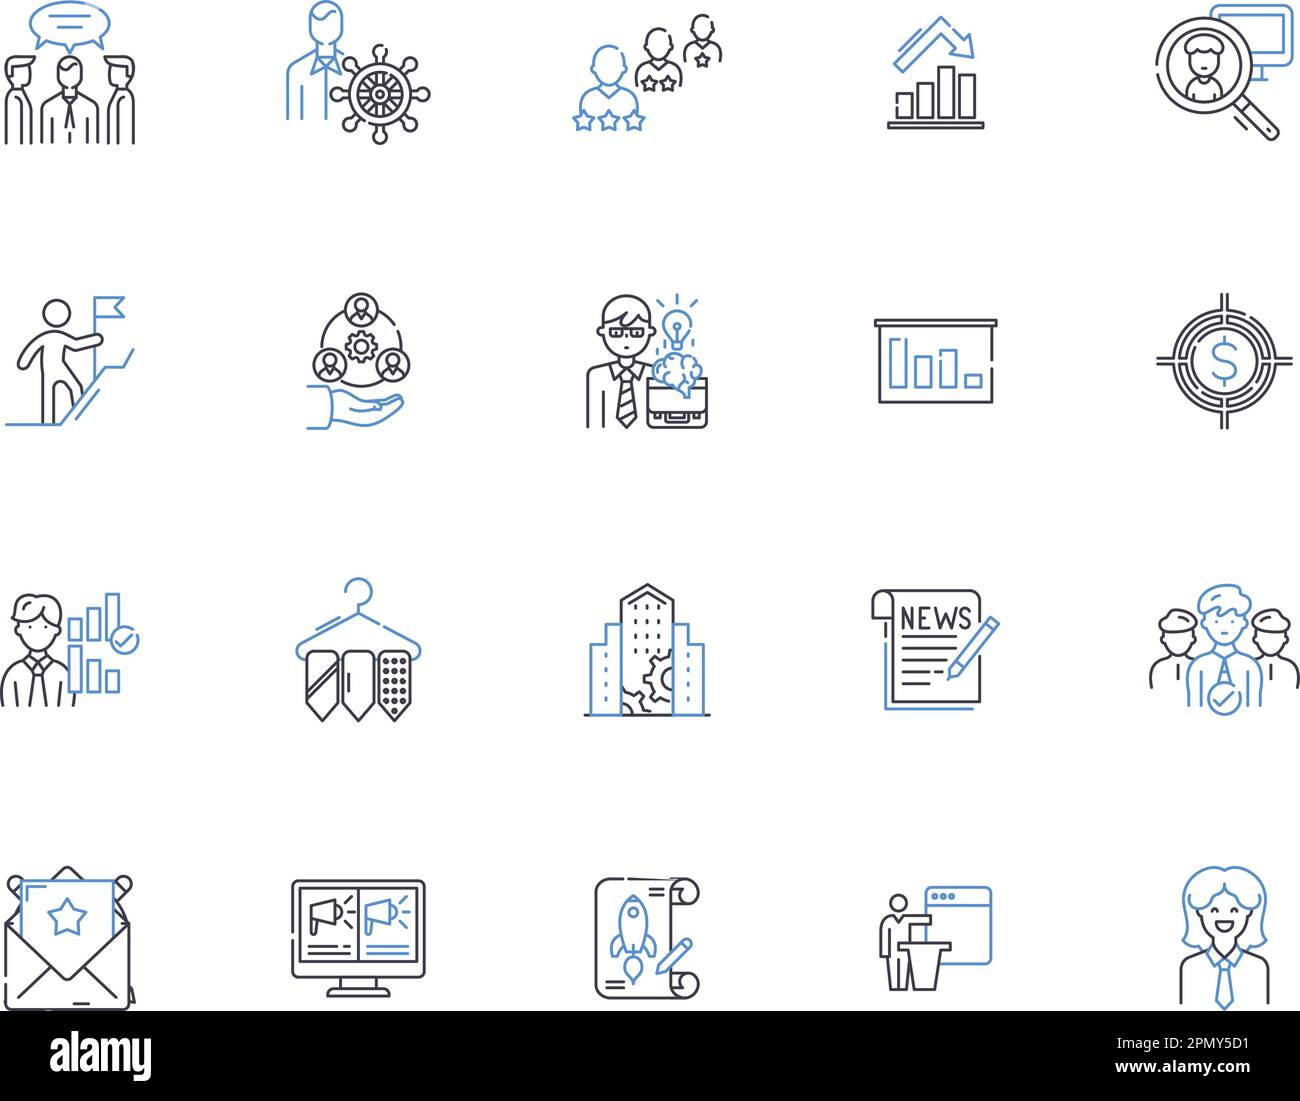 Digital leadership outline icons collection. Digital, Leadership, Transformation, Technology, Strategies, Digitalization, Management vector and Stock Vector